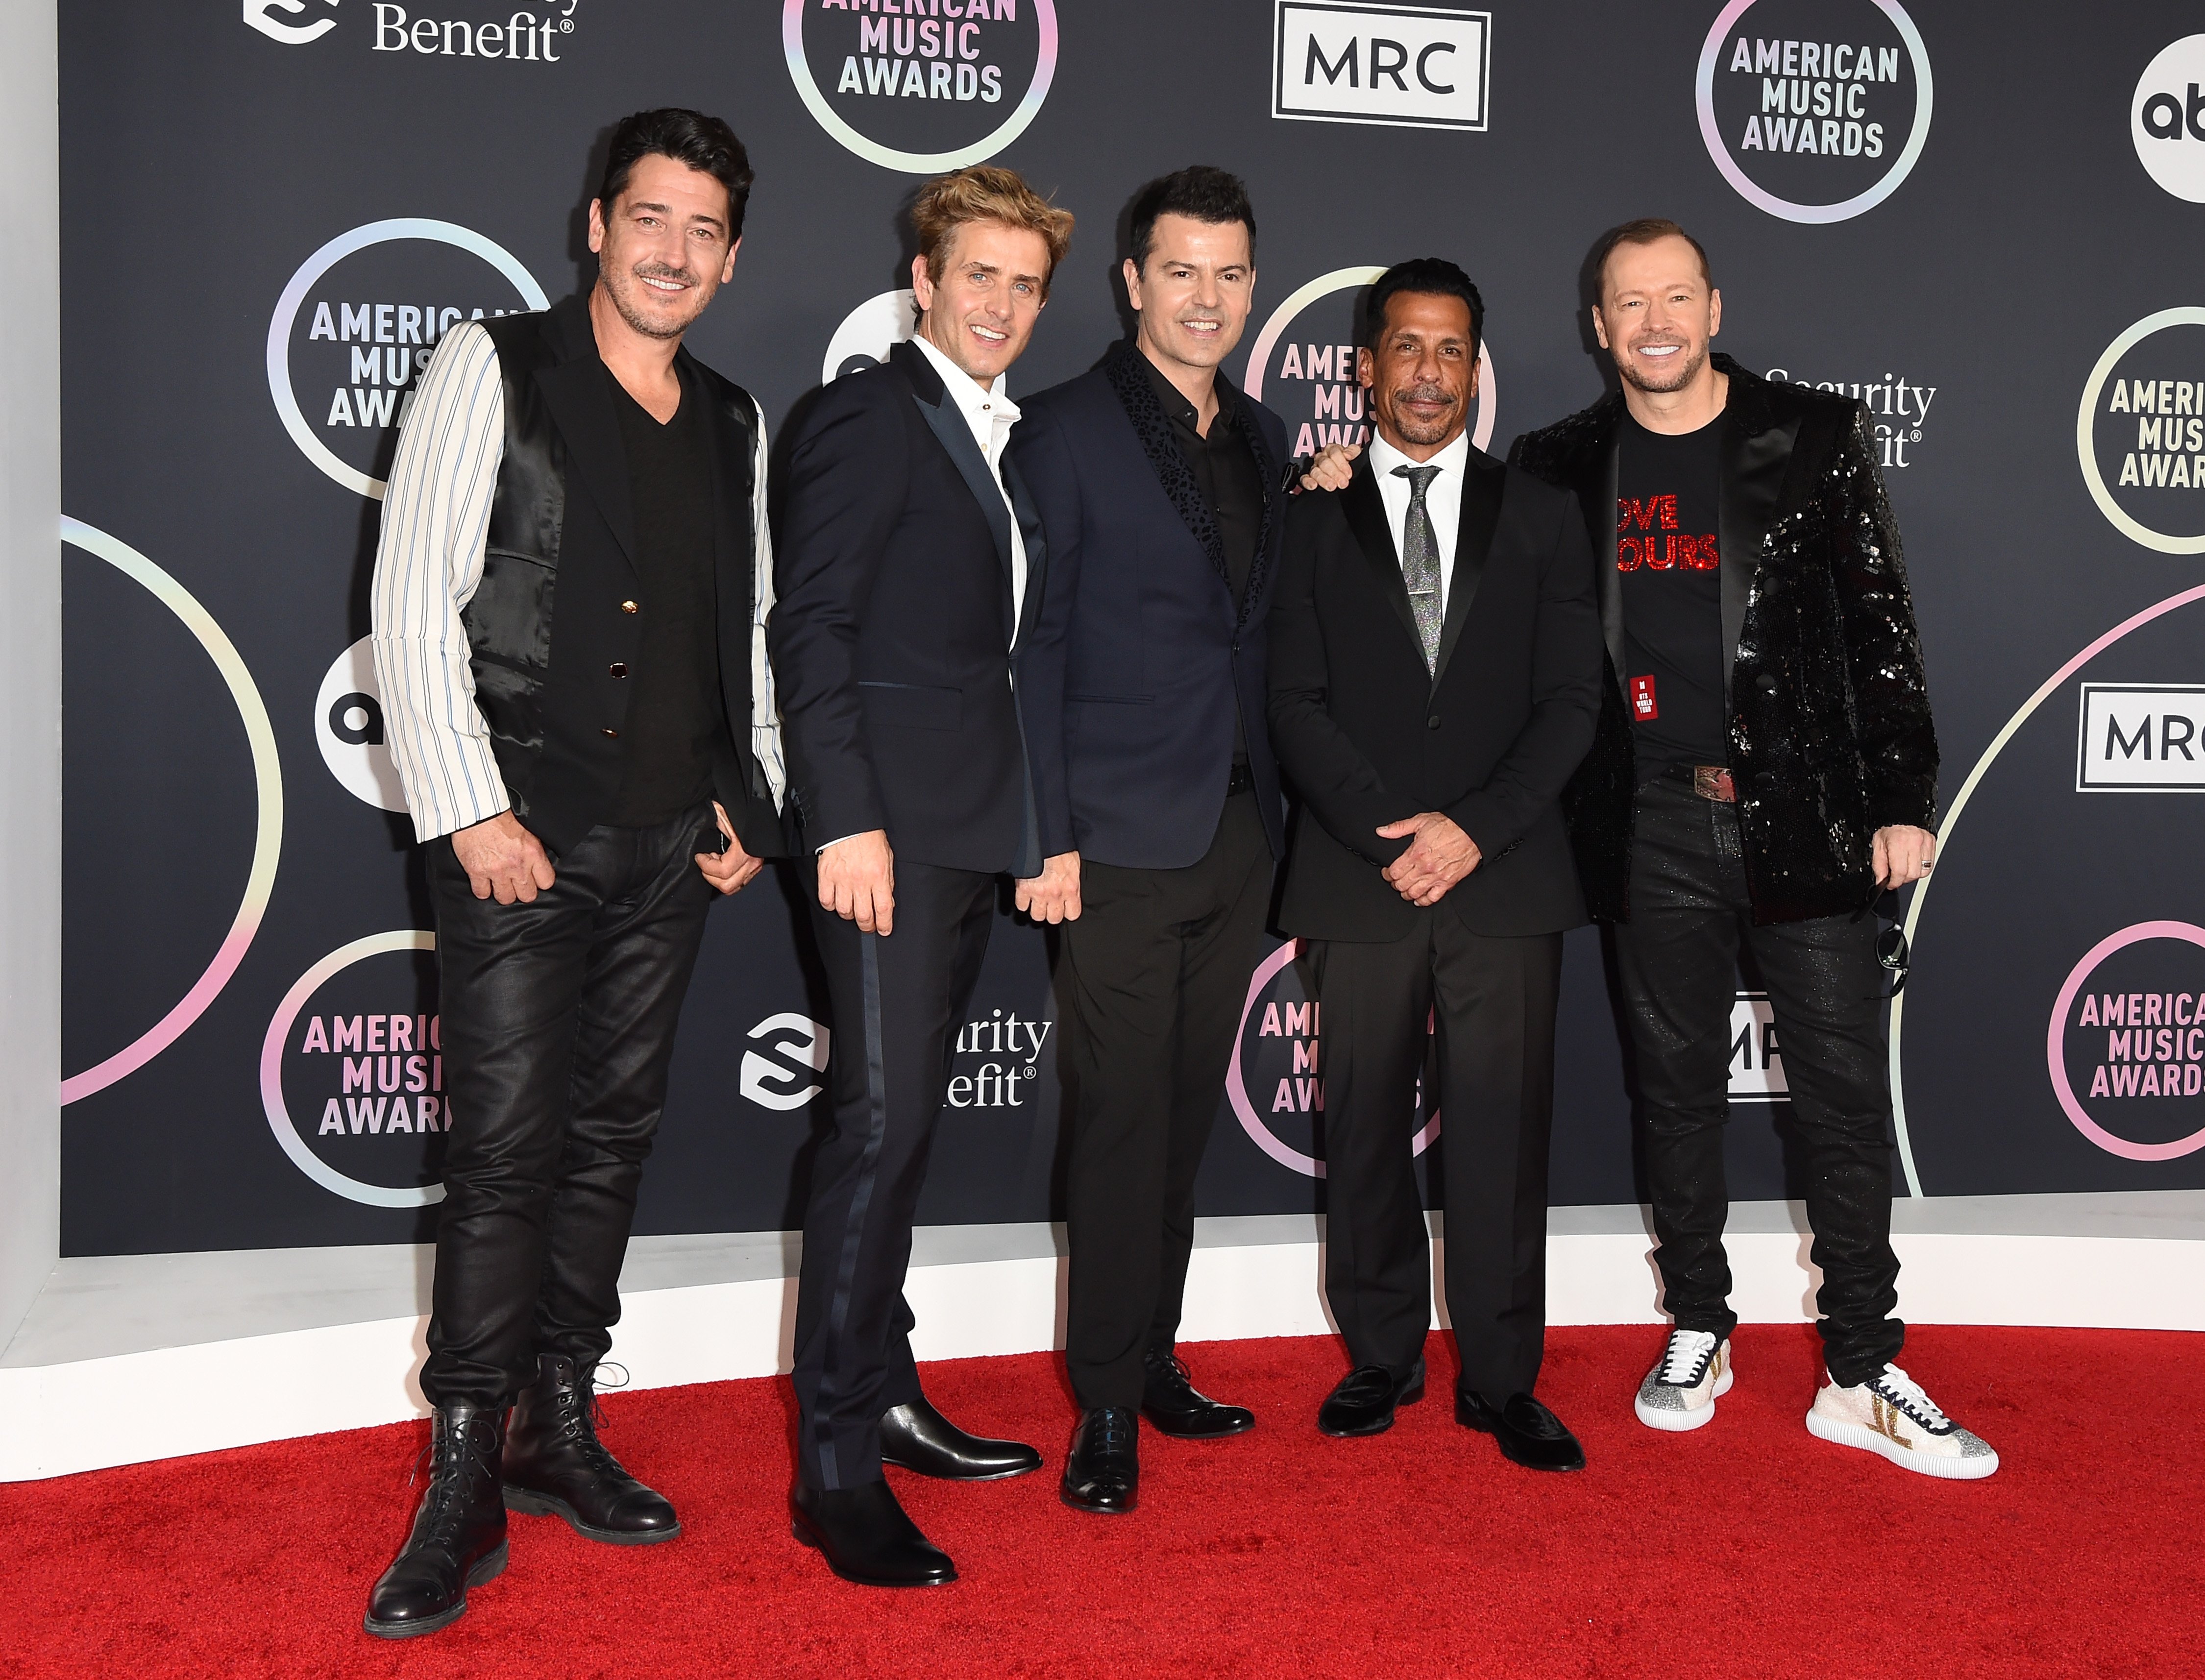 (L-R) Jonathan Knight, Joey McIntyre, Jordan Knight, Danny Wood, and Donnie Wahlberg of New Kids on the Block at the American Music Awards